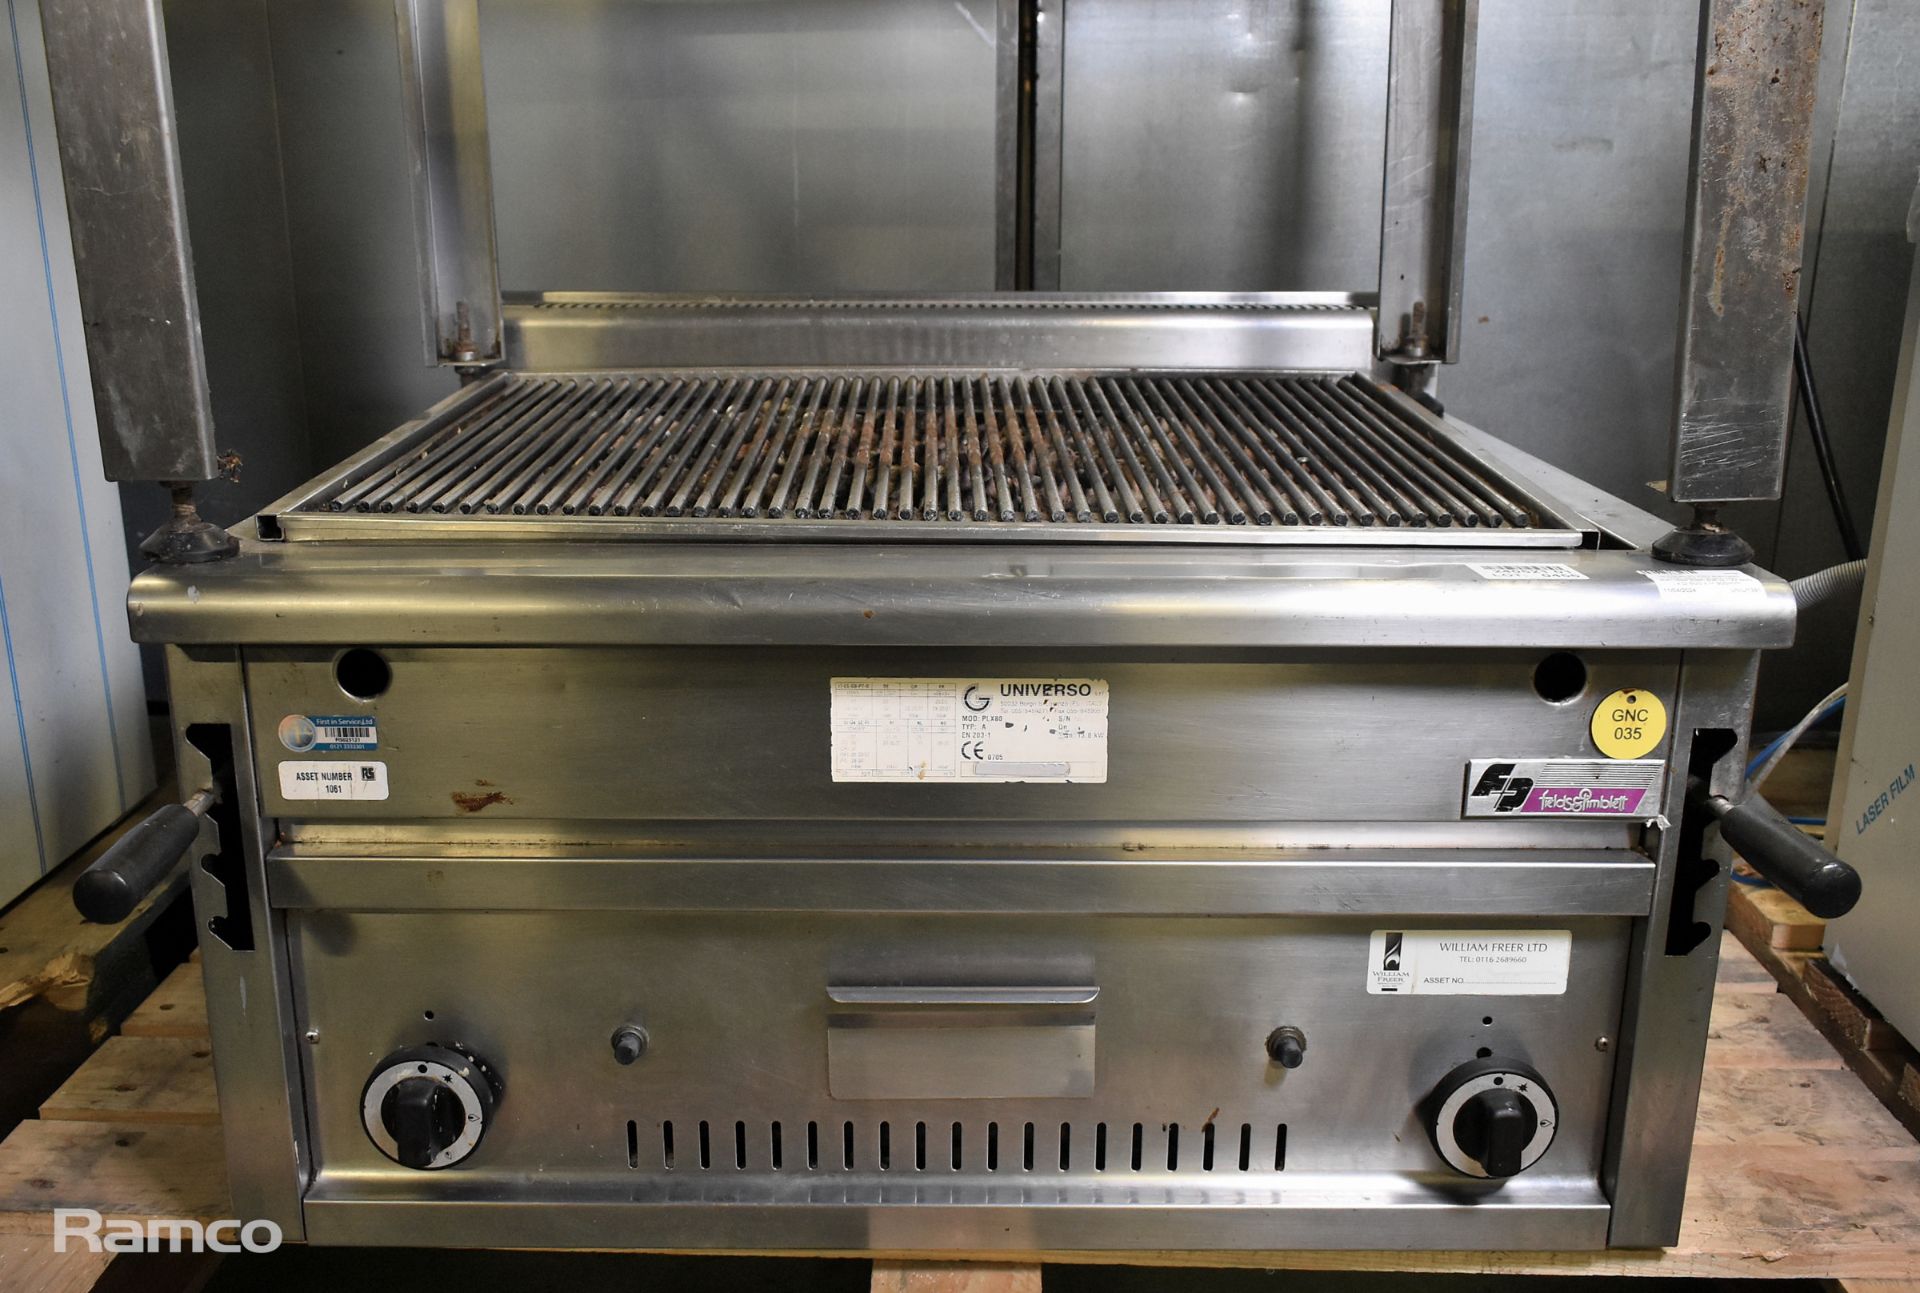 Universo PLX80 stainless steel gas chargrill with stainless steel stand - W 800 x D 800 x H 900mm - Image 2 of 6